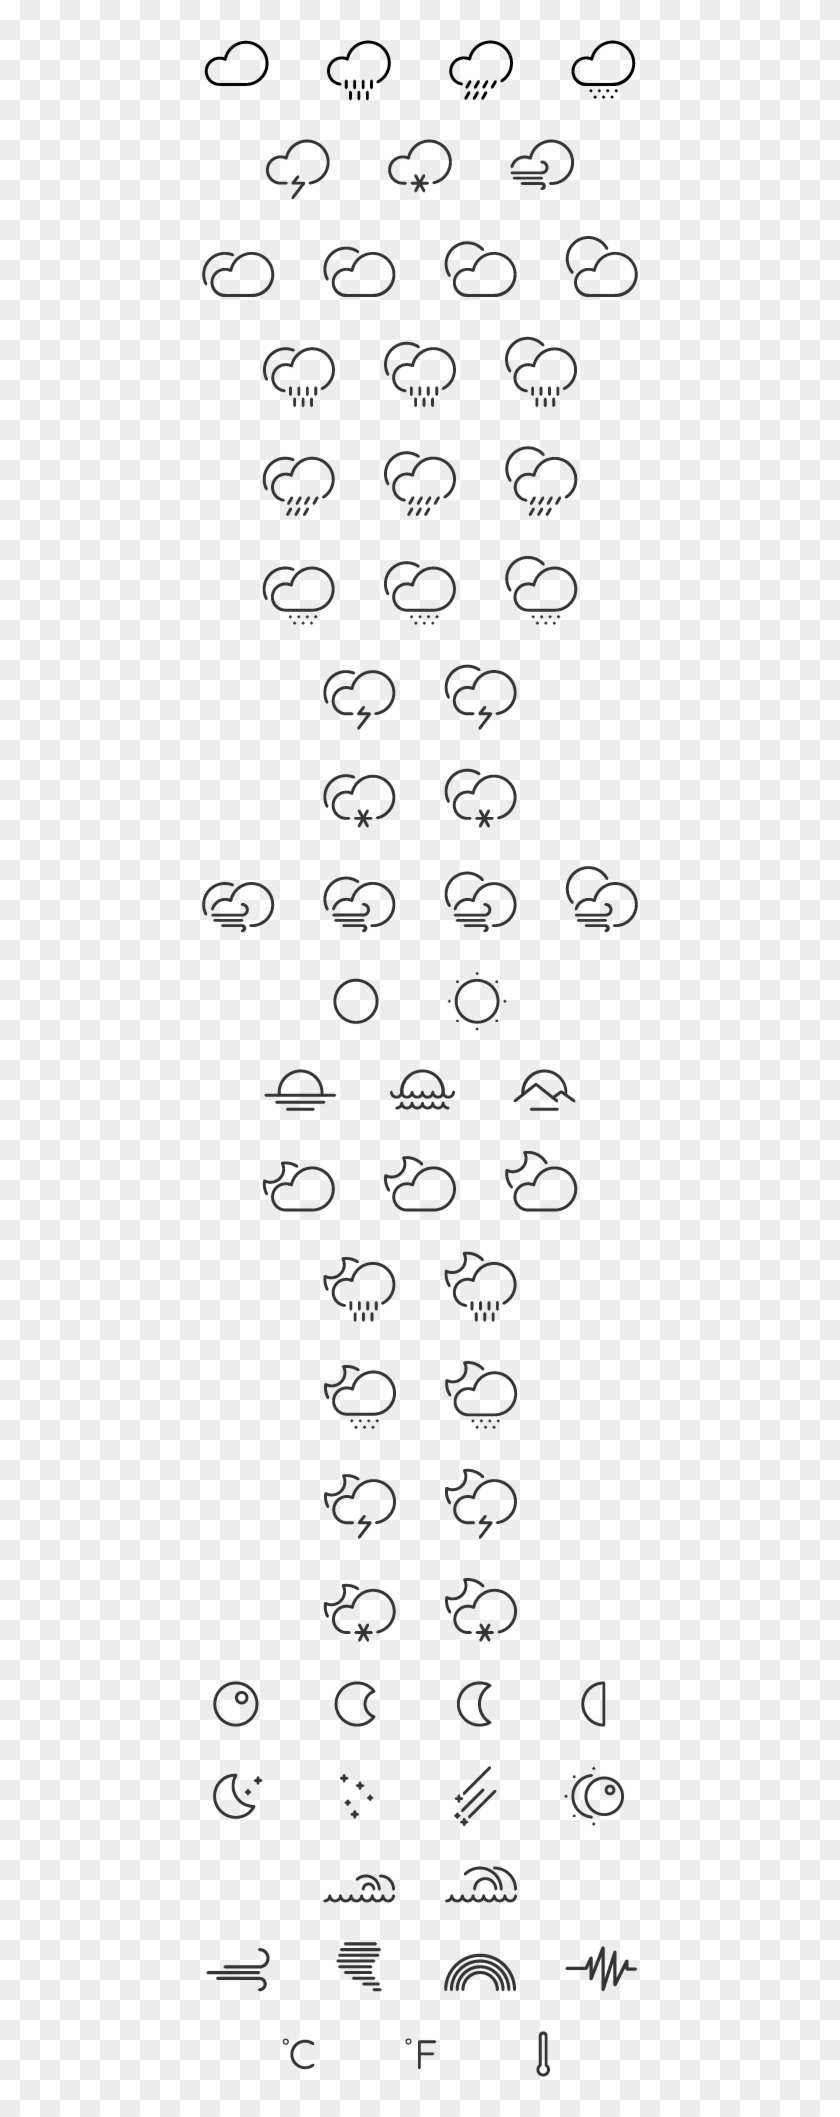 Cute Weather Line Icons Vector Material - Weather Line Icon Free Clipart #1324275